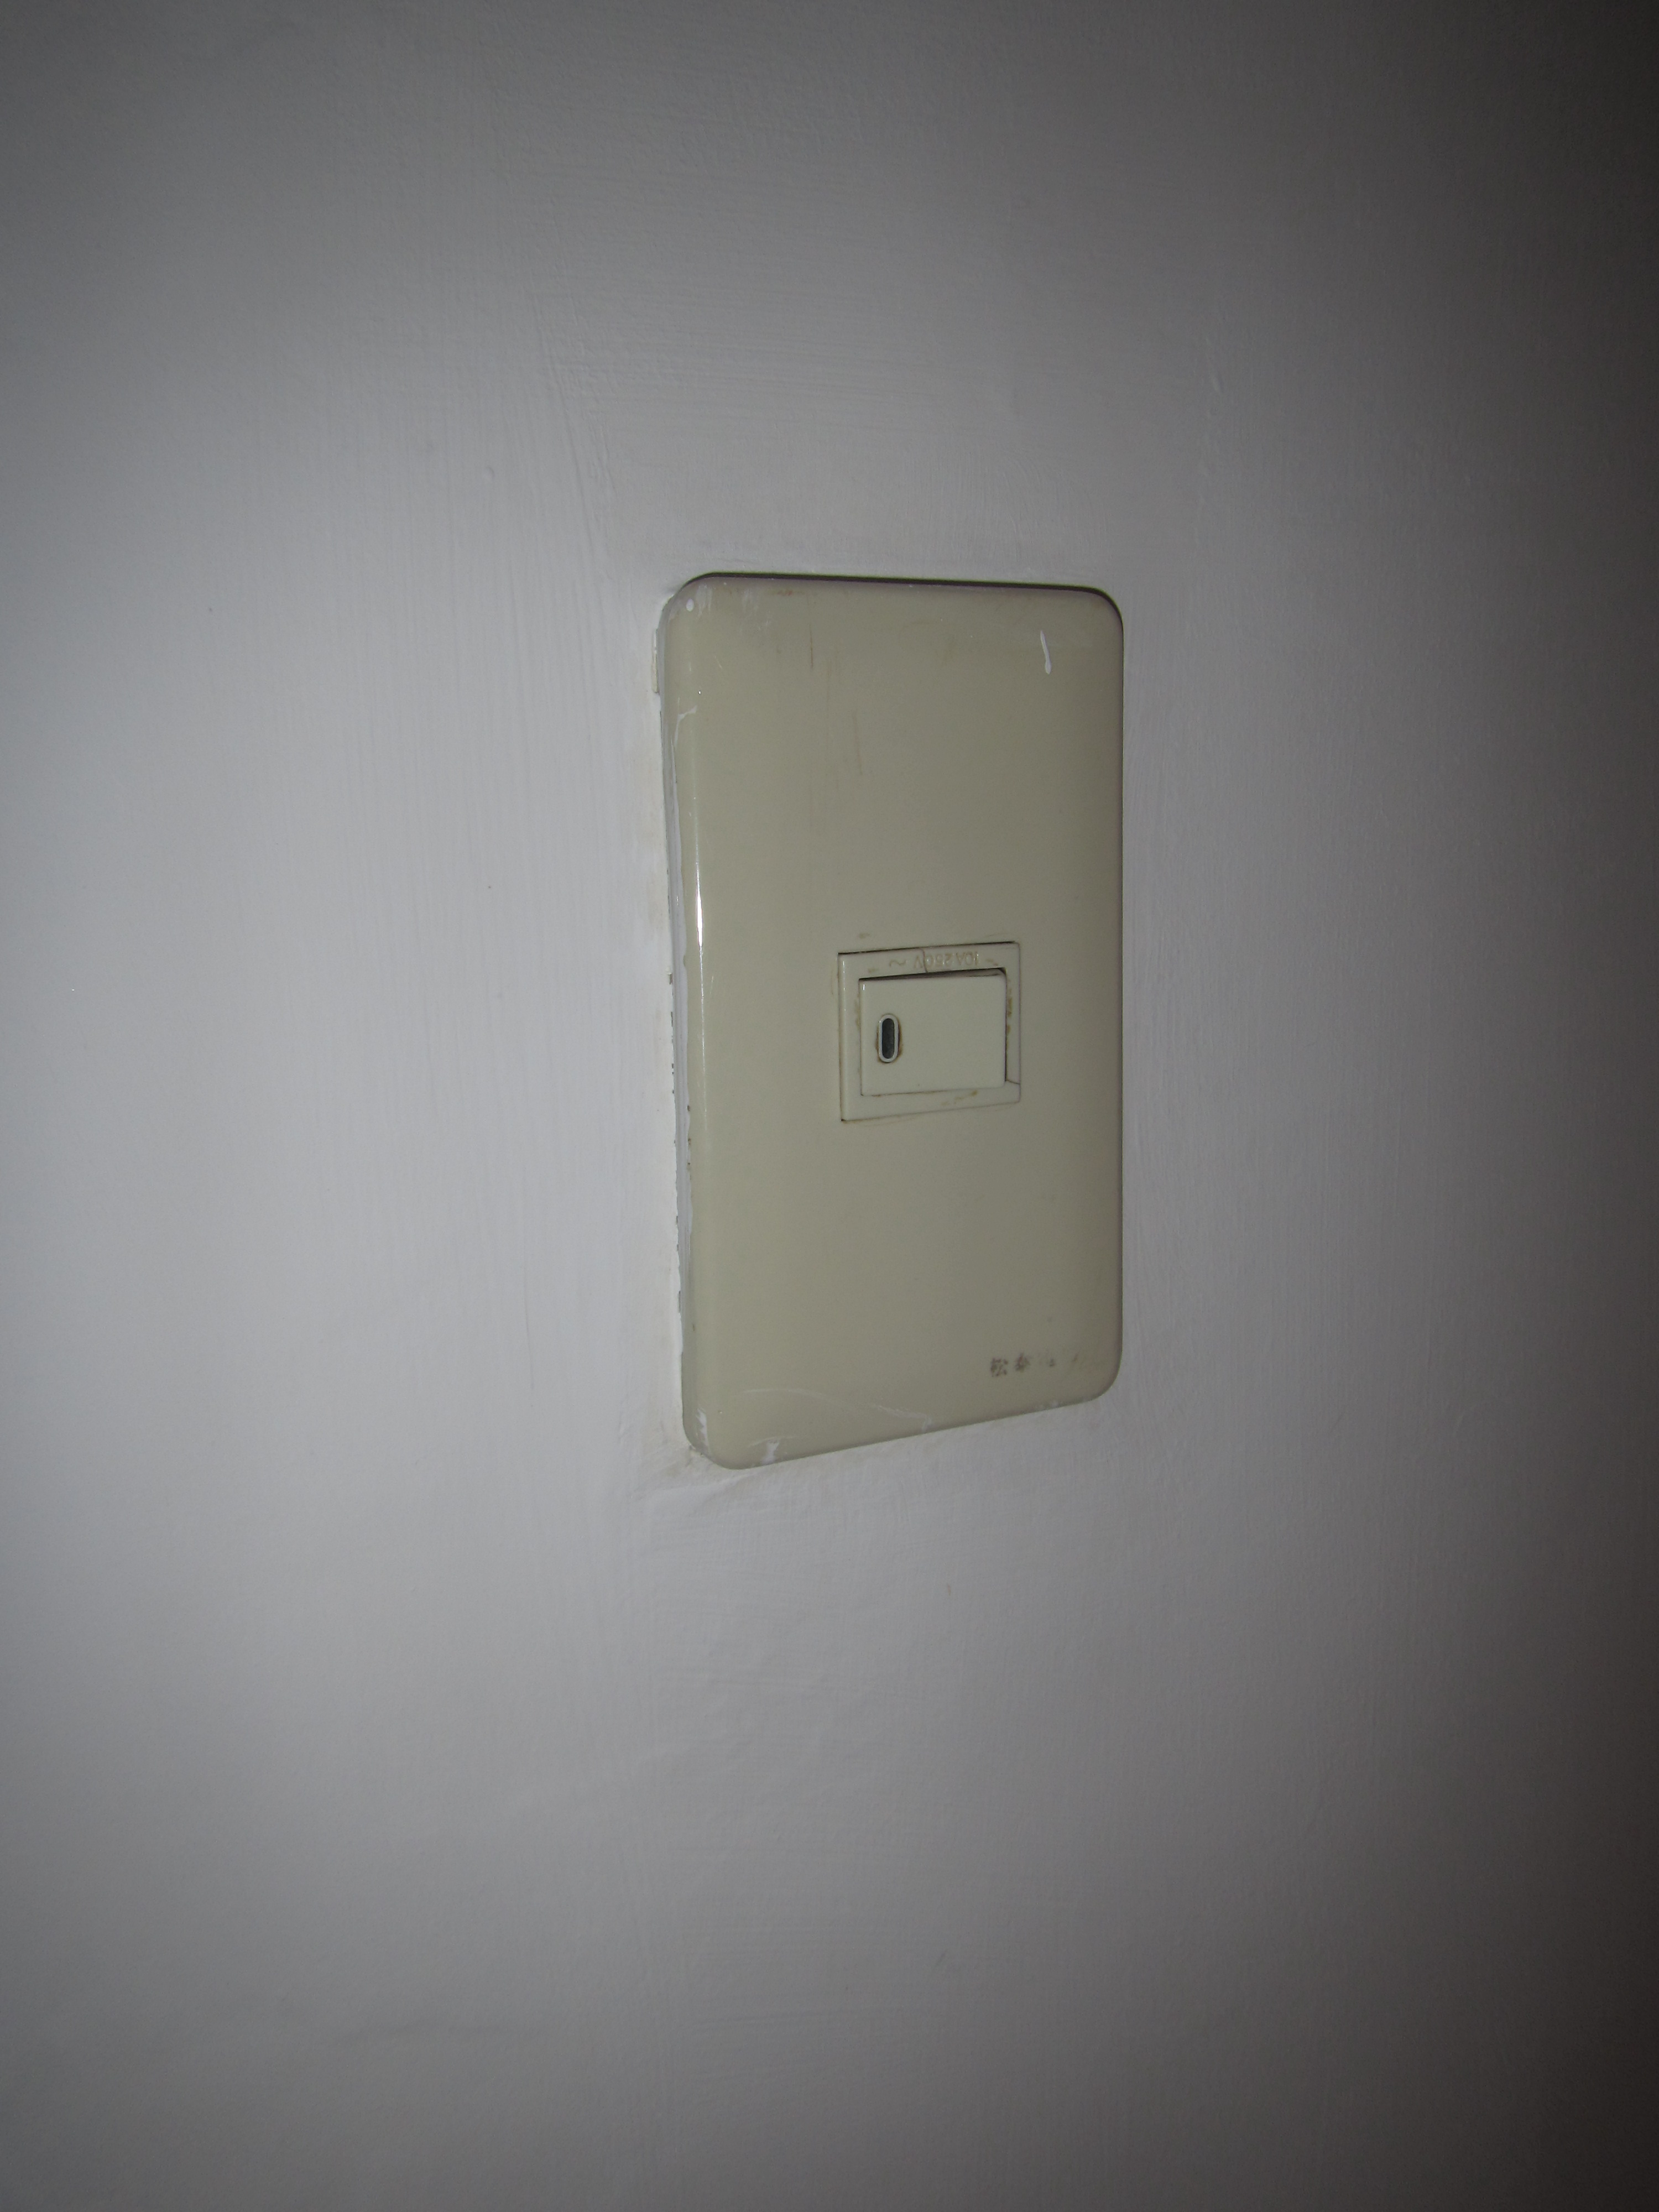 The same light switch after approximately 30 seconds of work...